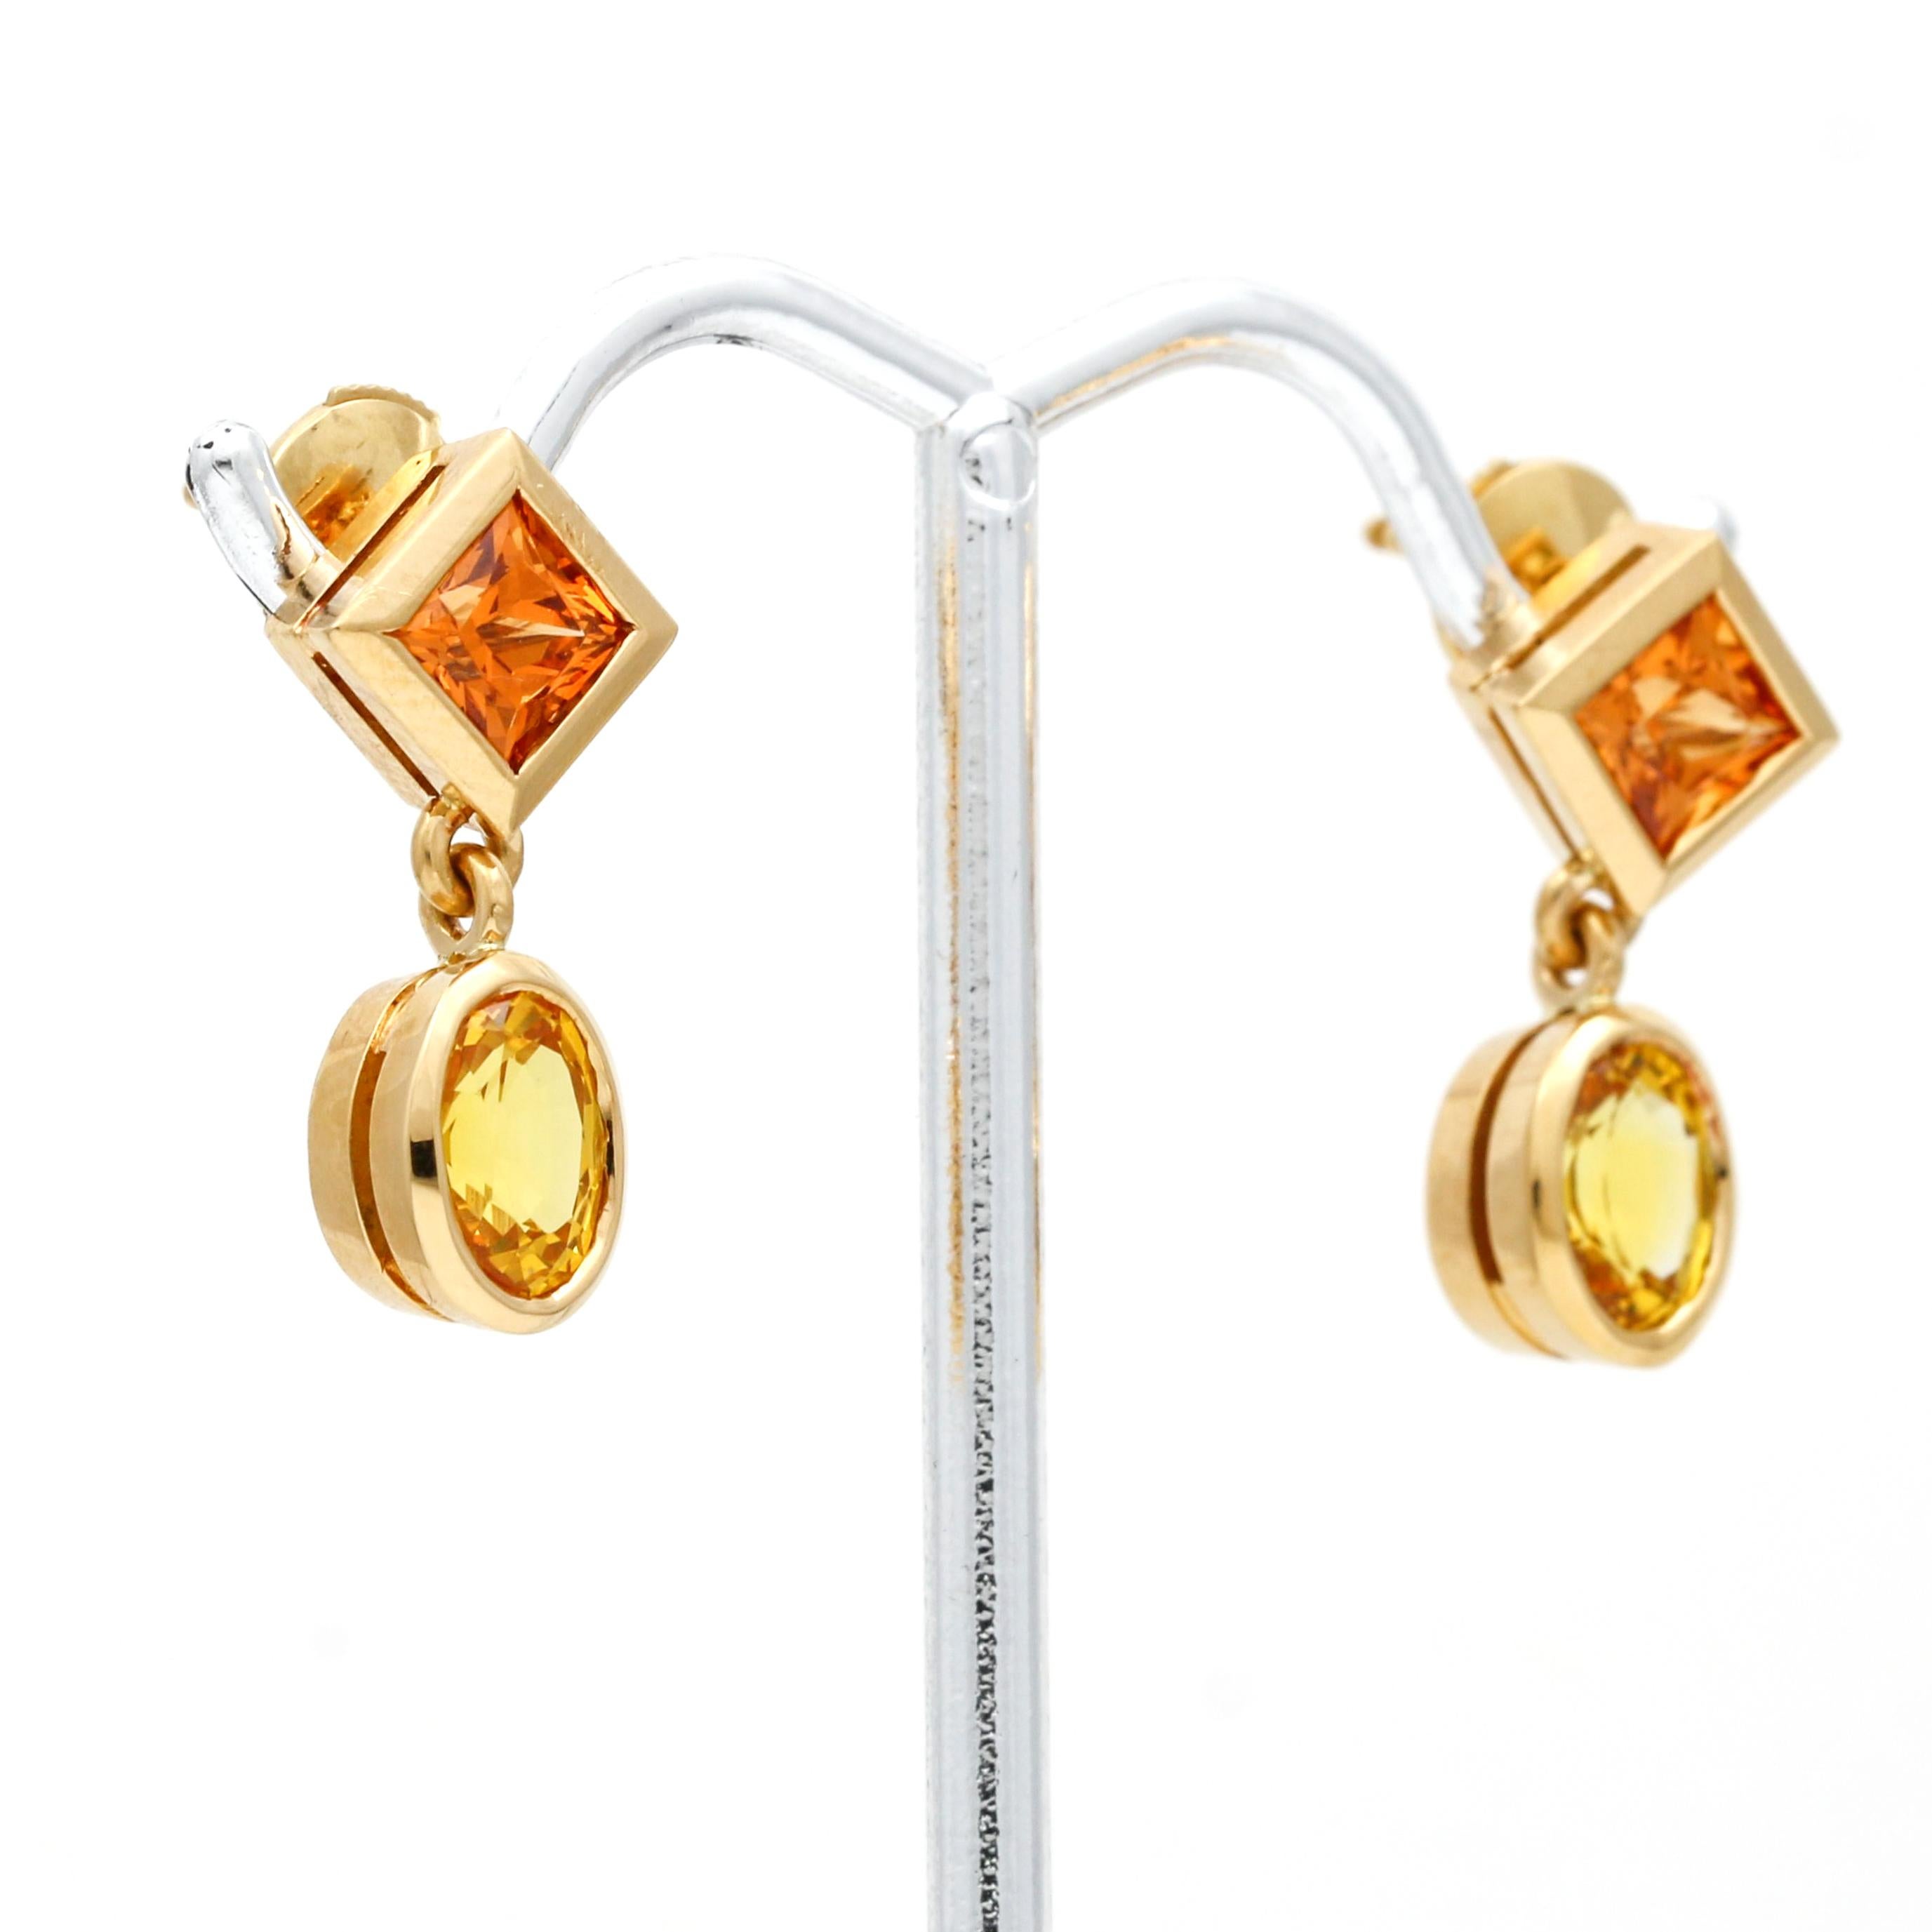 These Women's Madeira Citrine Yellow Sapphire Dangle Earrings in 18k gold are stunning and elegant. Each earring features two beautiful bezel-set gemstones, a princess-cut Madeira citrine, and an oval-cut yellow sapphire that hangs and dangles,